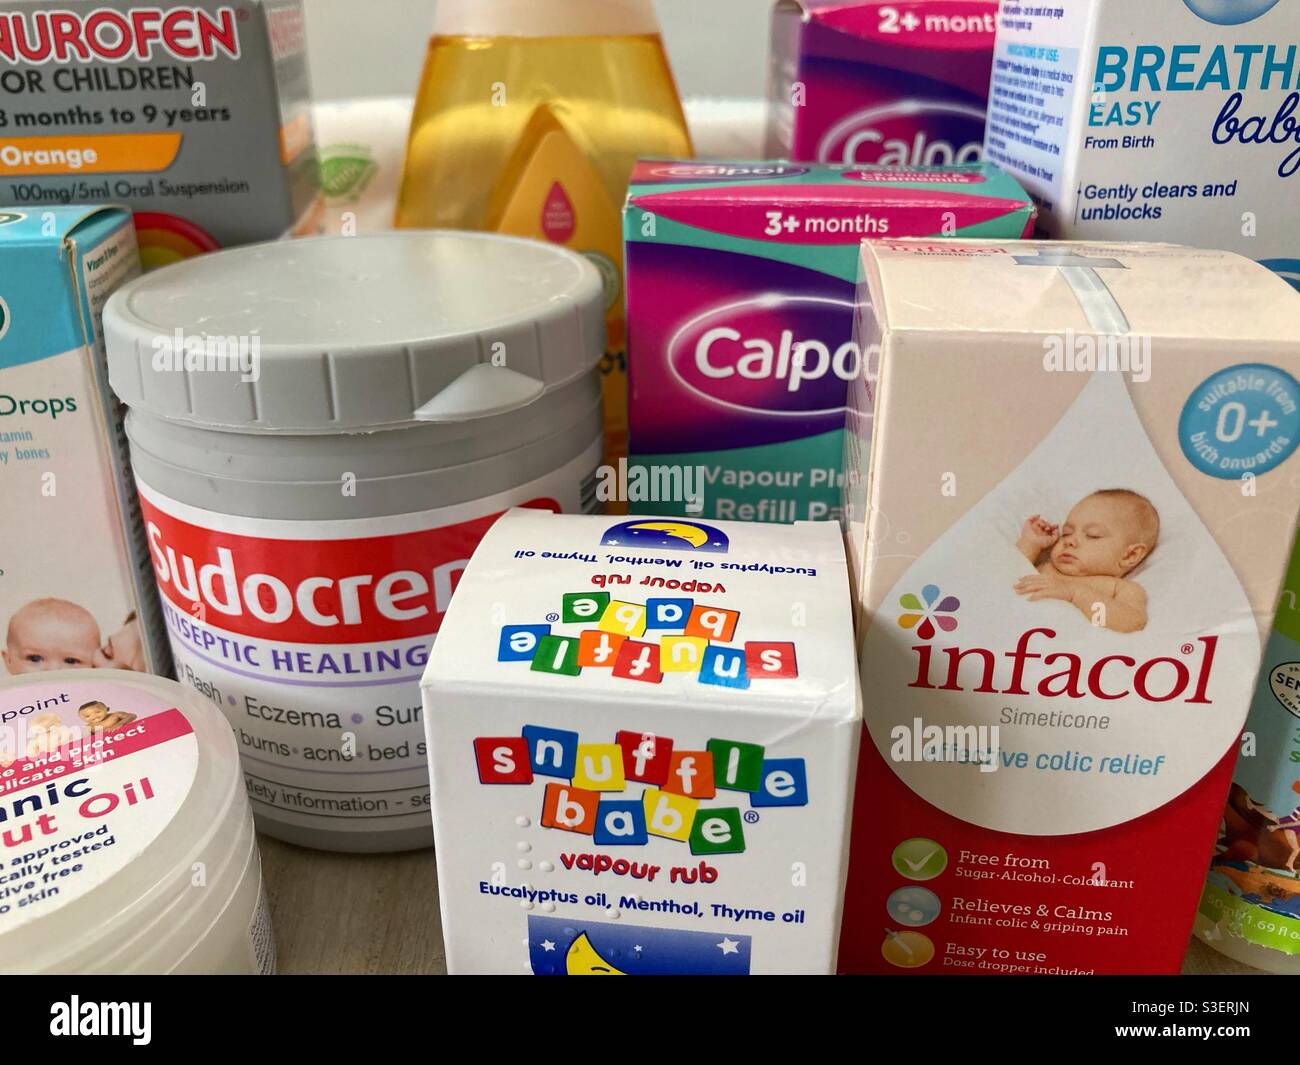 A selection of baby medicine/ drugs/ care products including the well know brands of Calpol, Sudocreme, Infracol, Snuffle babe, breath easy baby, Nurofen and Johnson hair shampoo Stock Photo